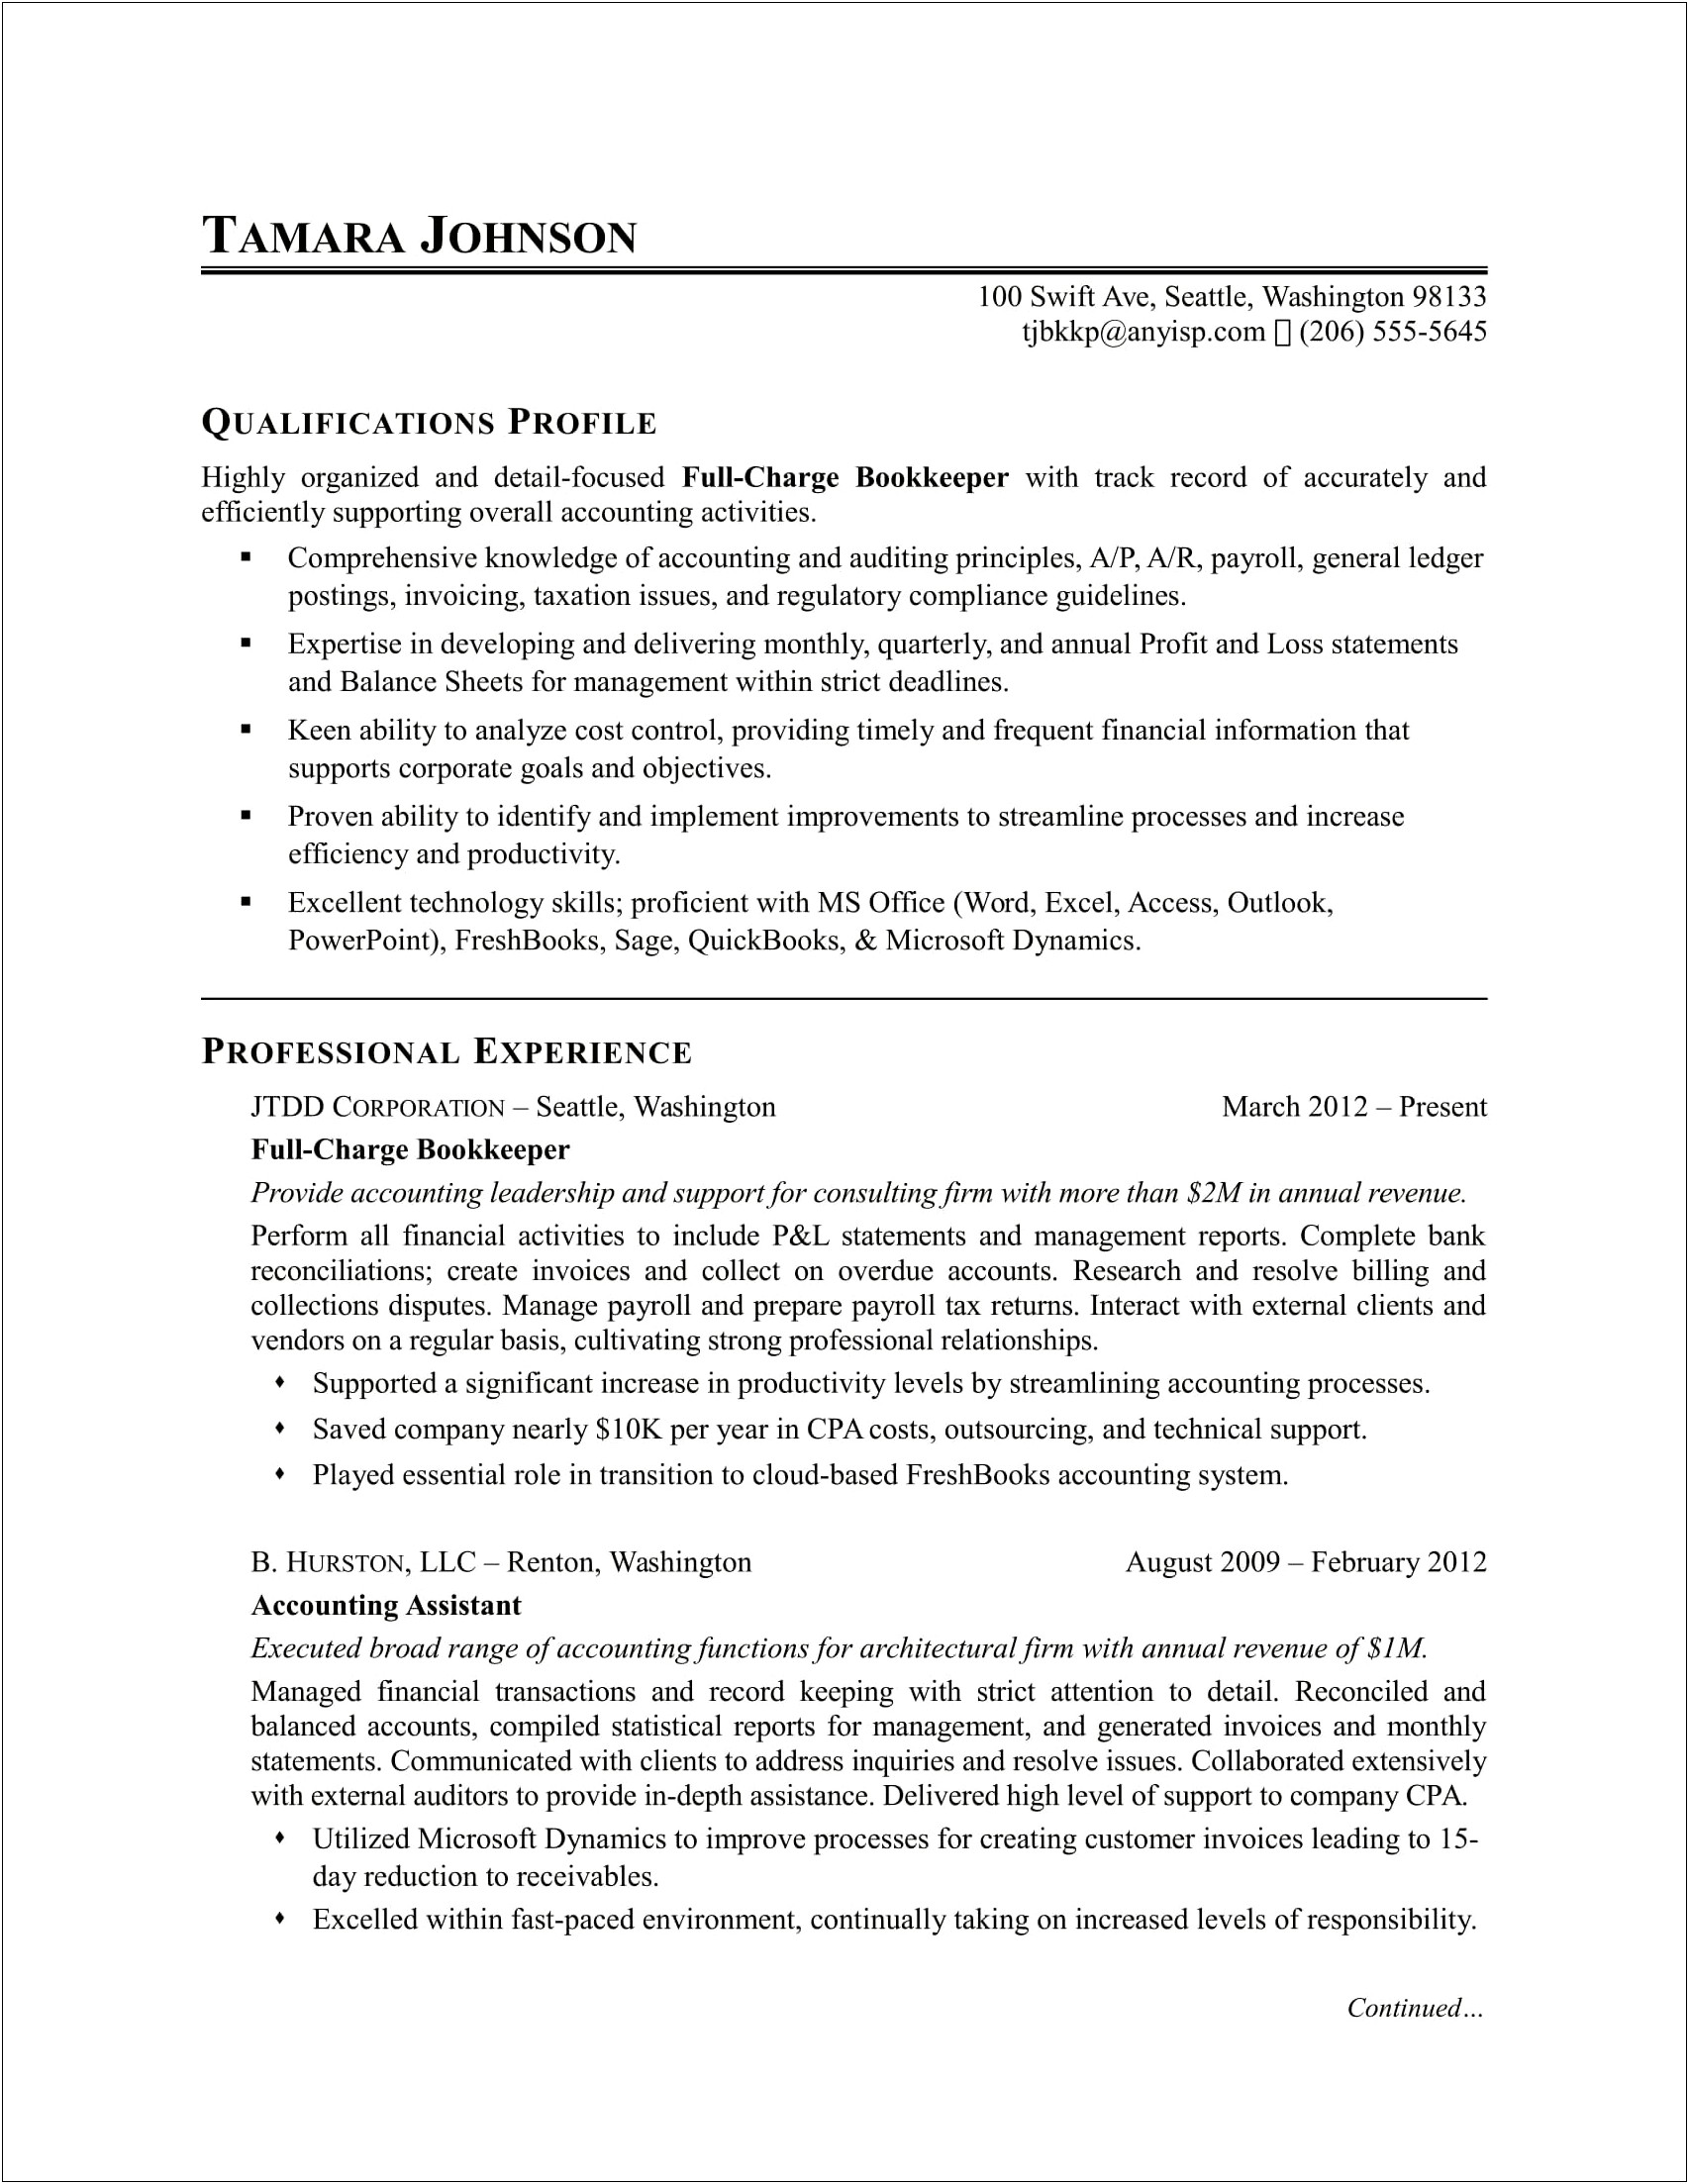 Account For Consulting And Freelance Work On Resume